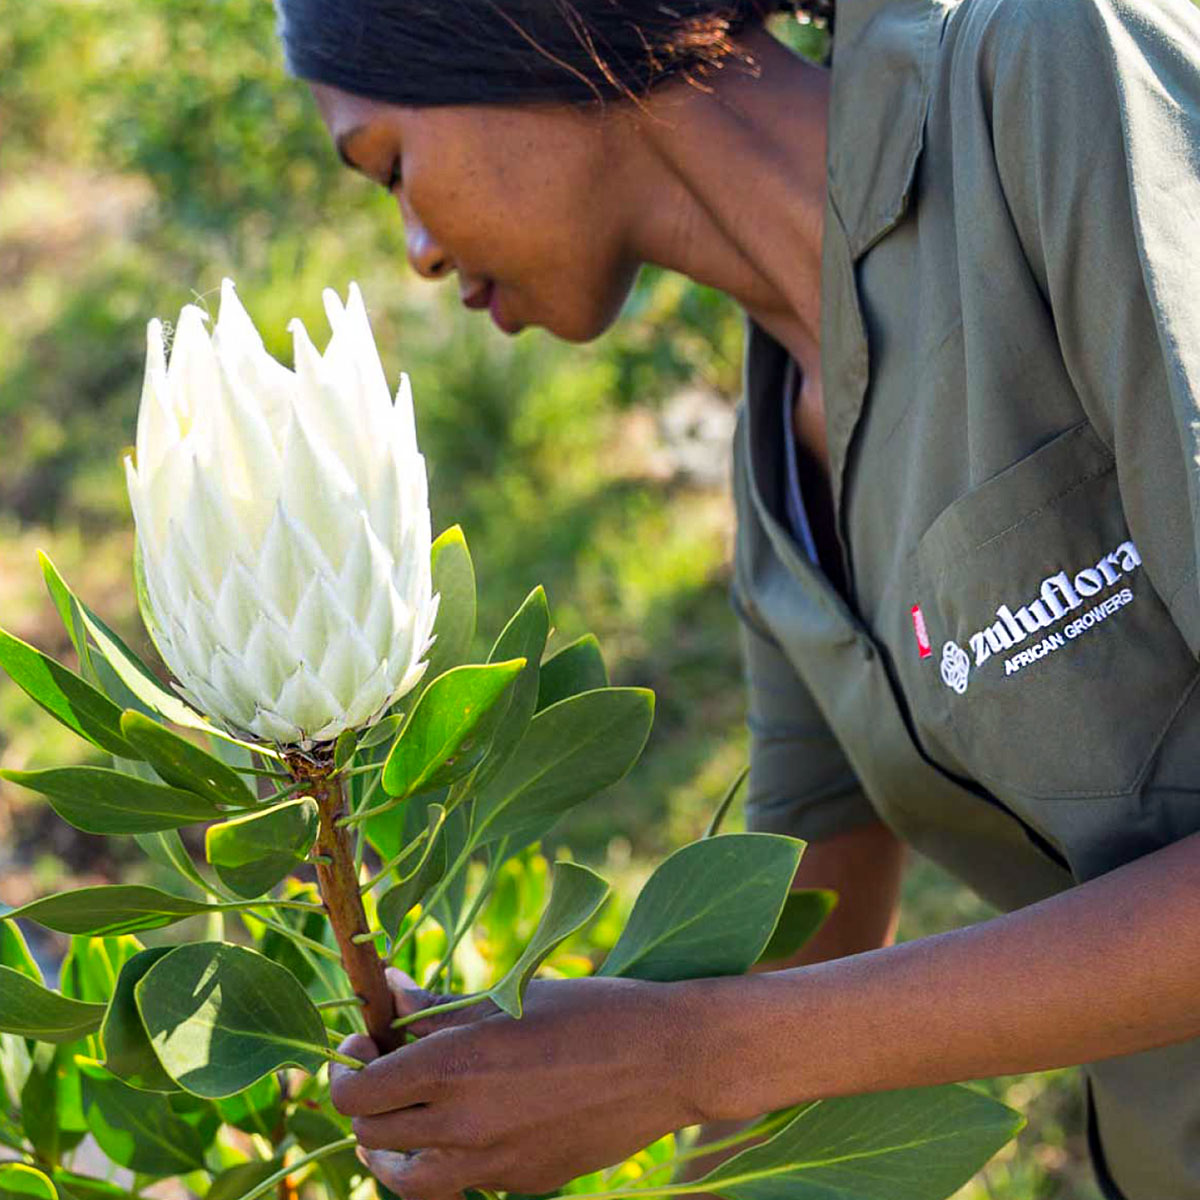 meet-zuluflora-african-growers-with-a-rich-and-deep-heritage-from-family-and-farmlands-featured